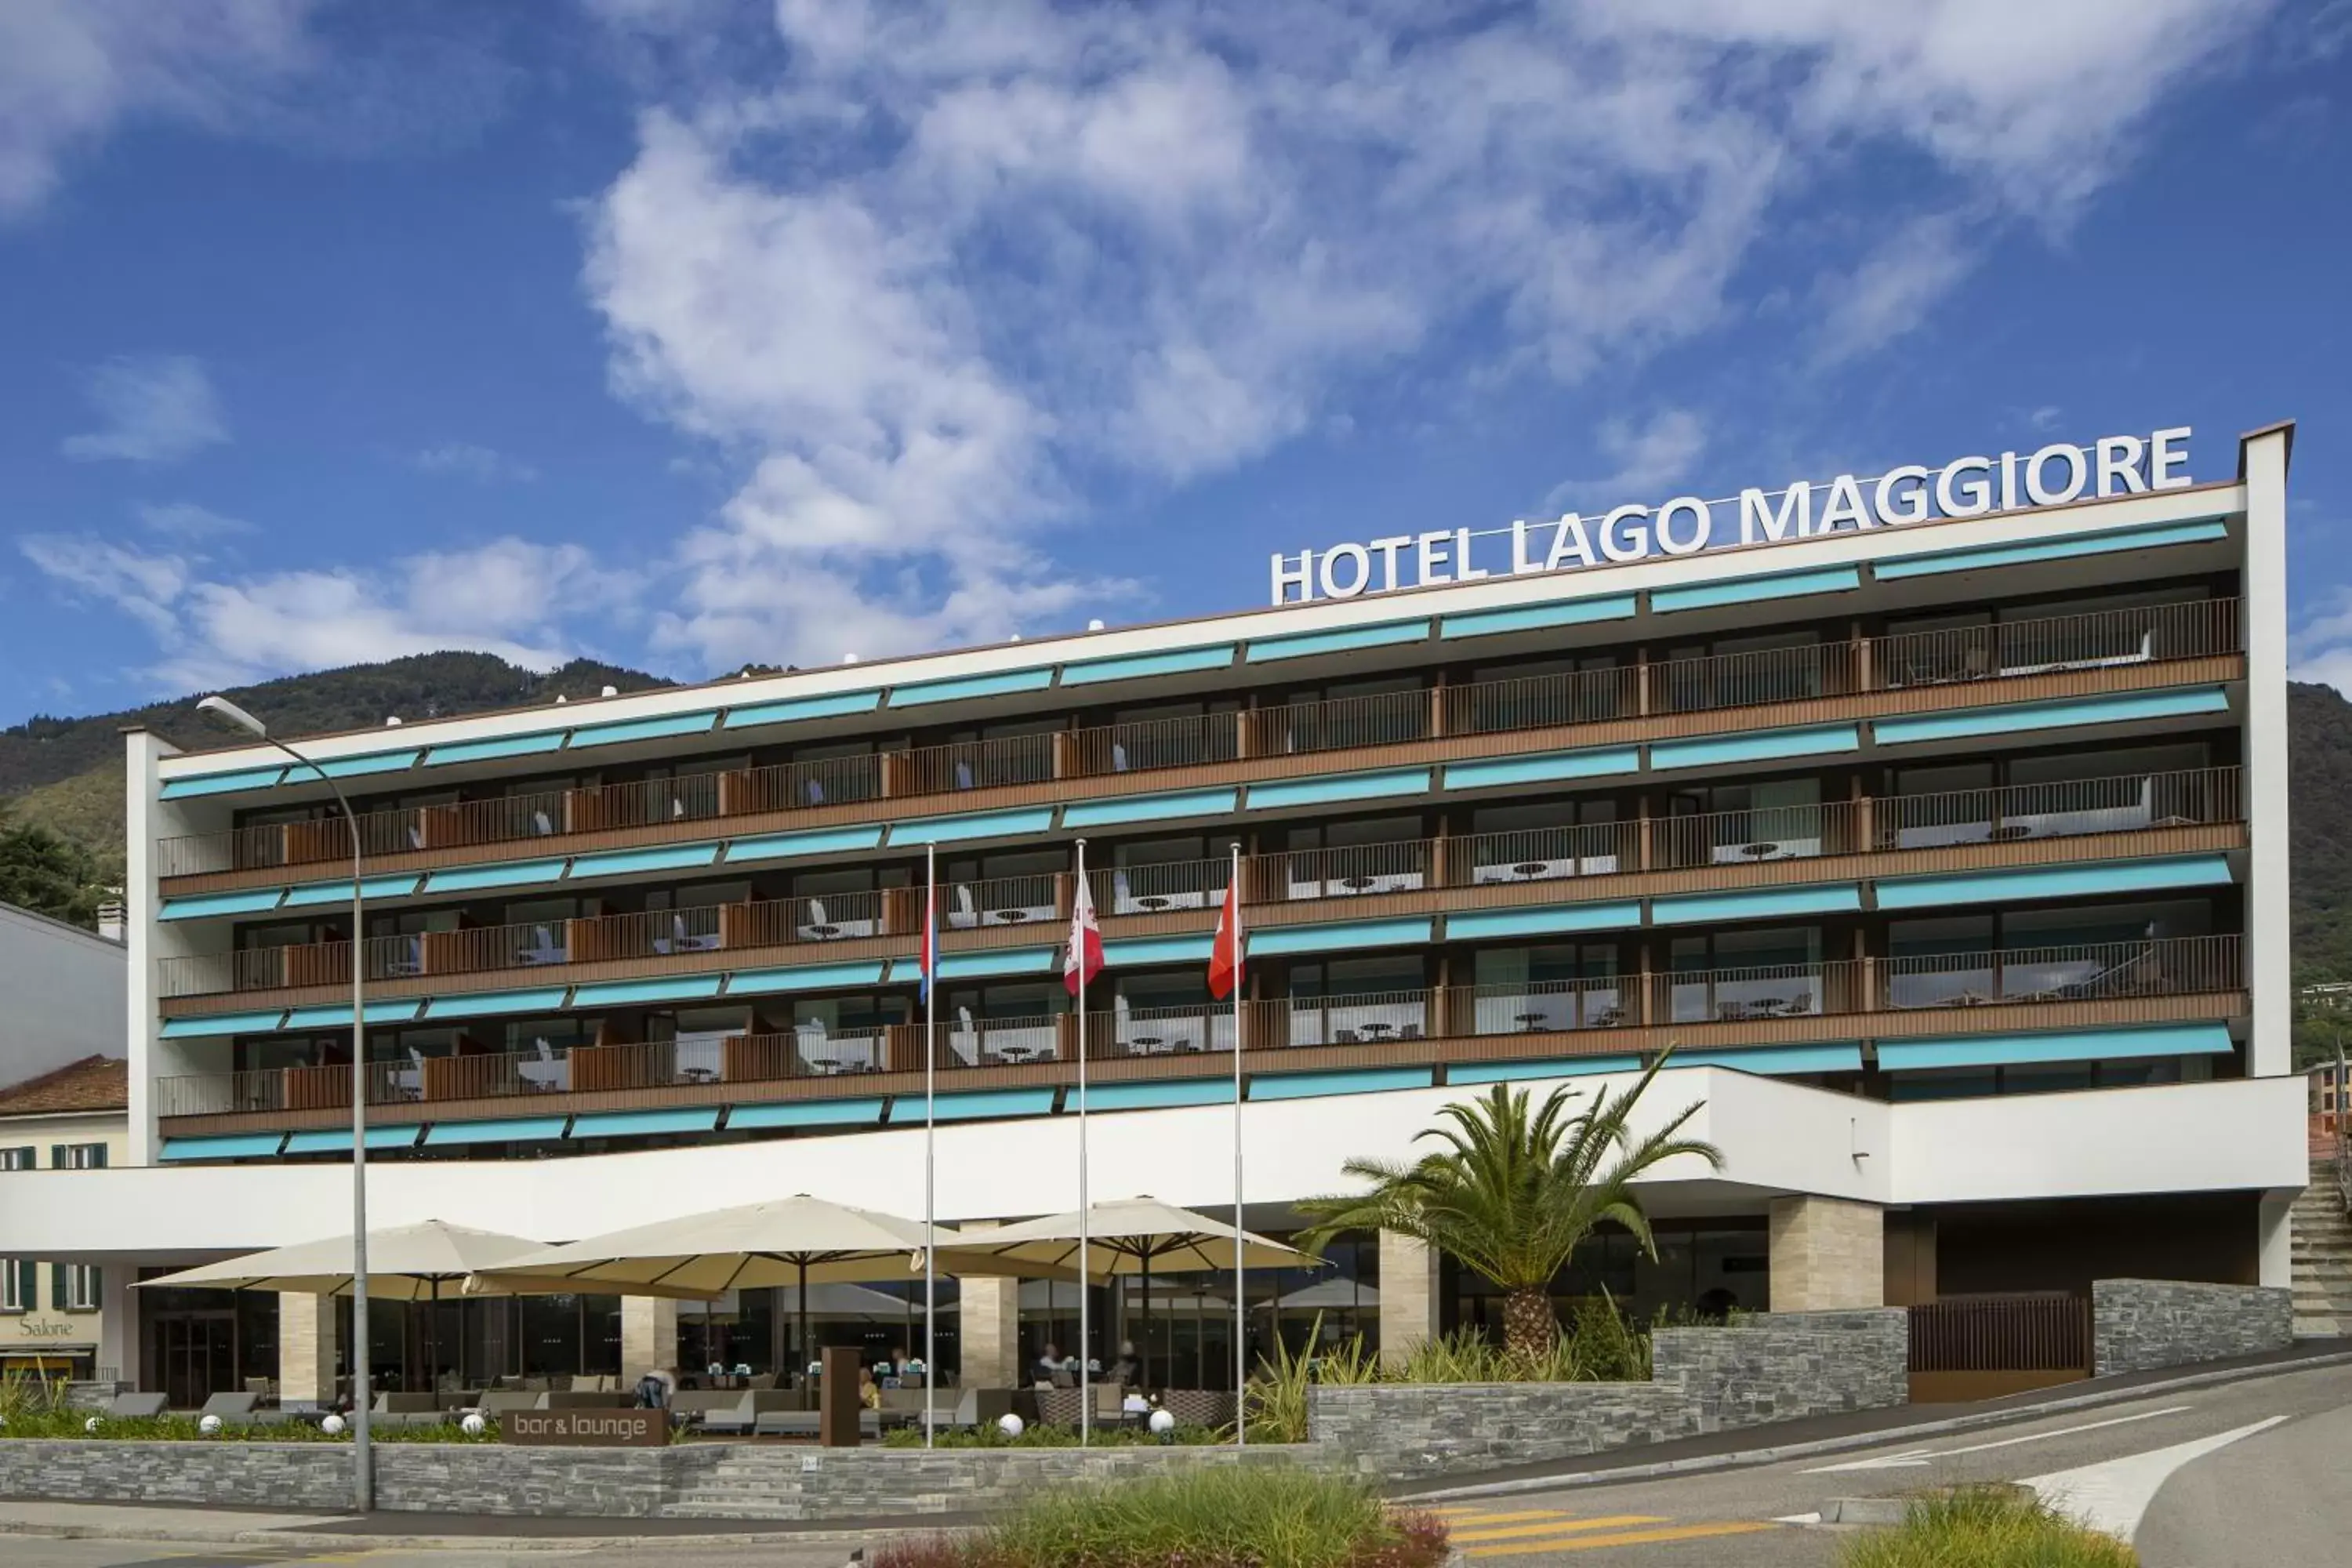 Lake view, Property Building in Hotel Lago Maggiore - Welcome!